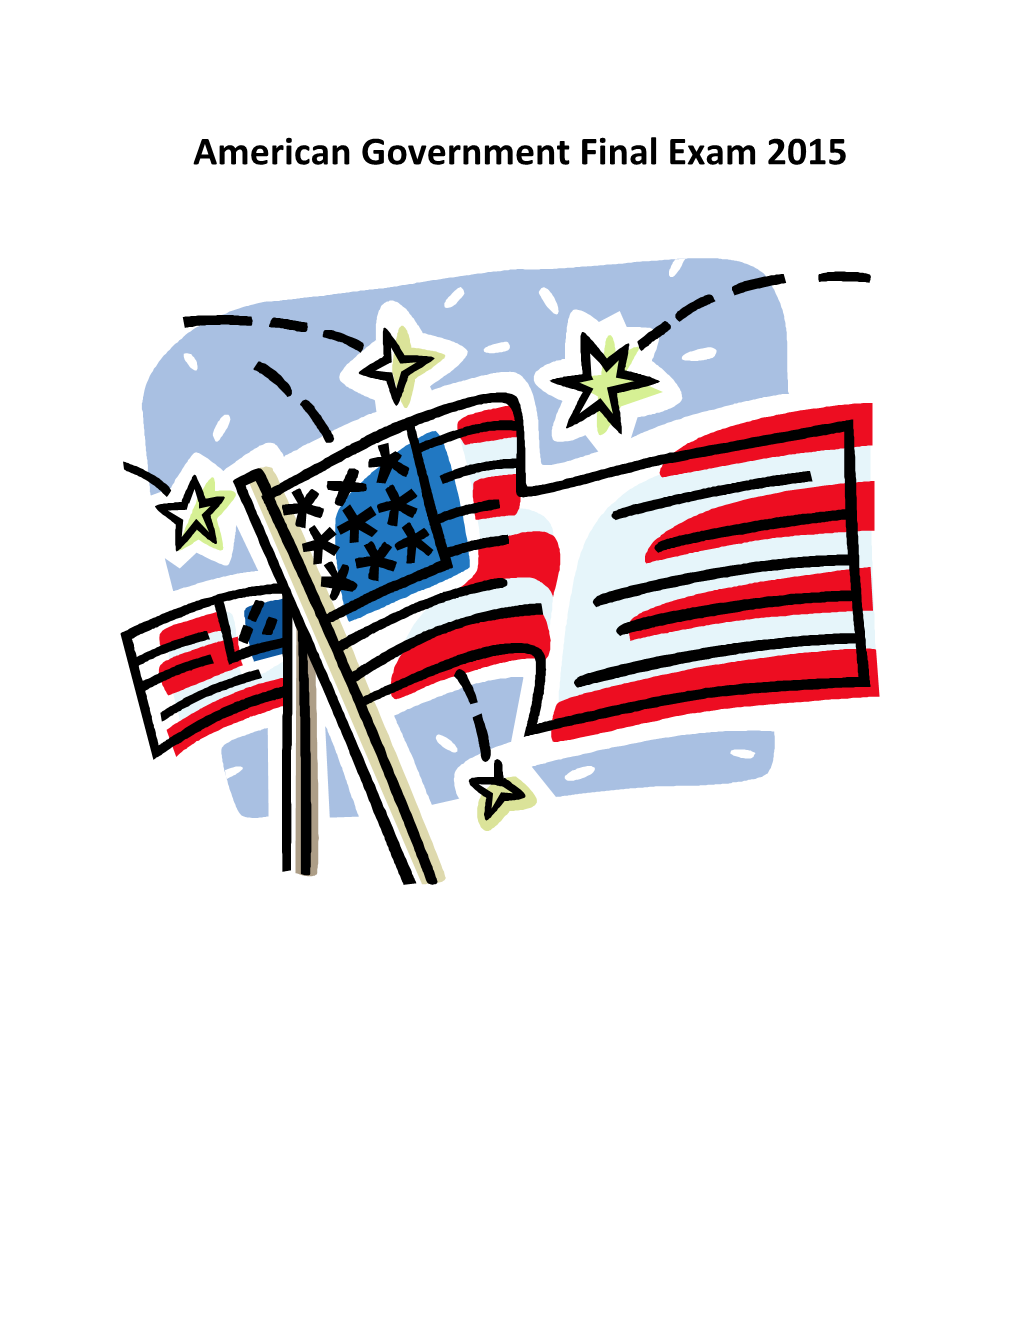 American Government Final Exam 2015